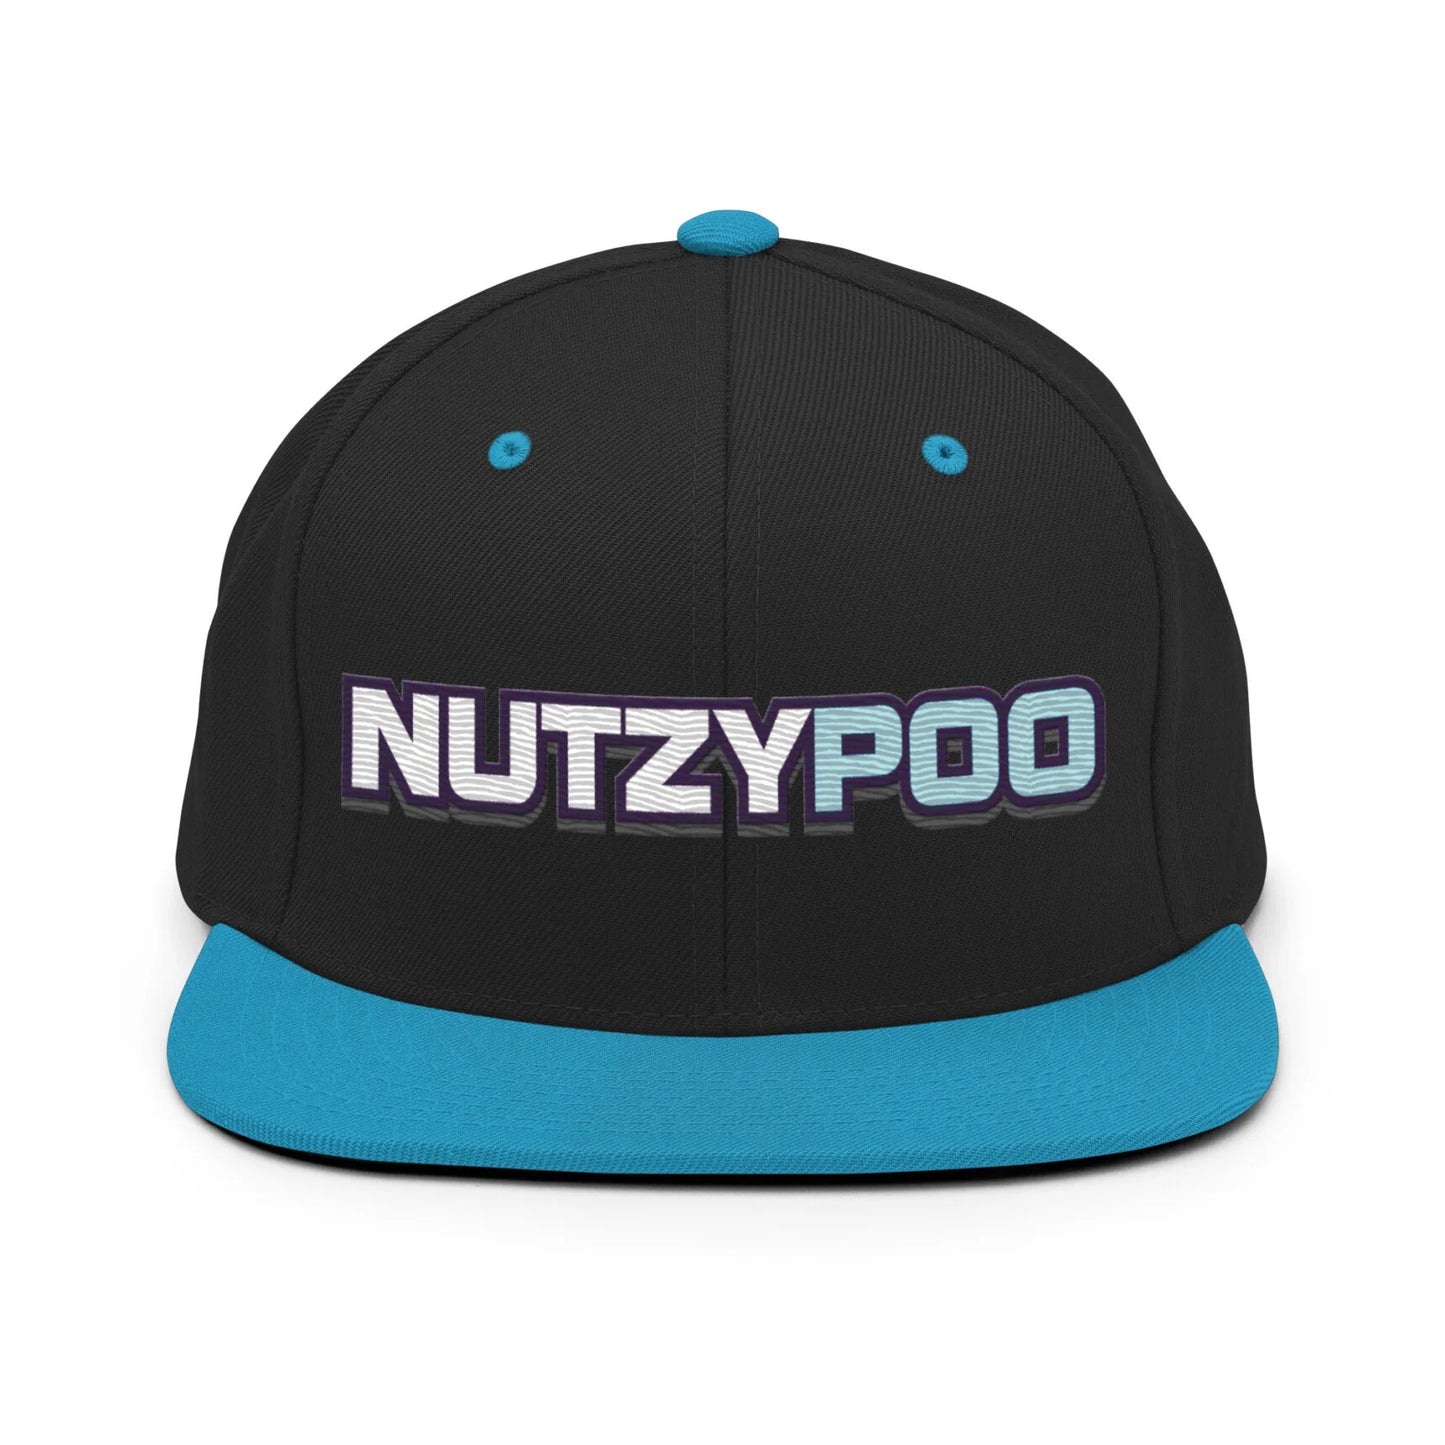 NutzyPoo ShowZone hat in black with blue brim and accents